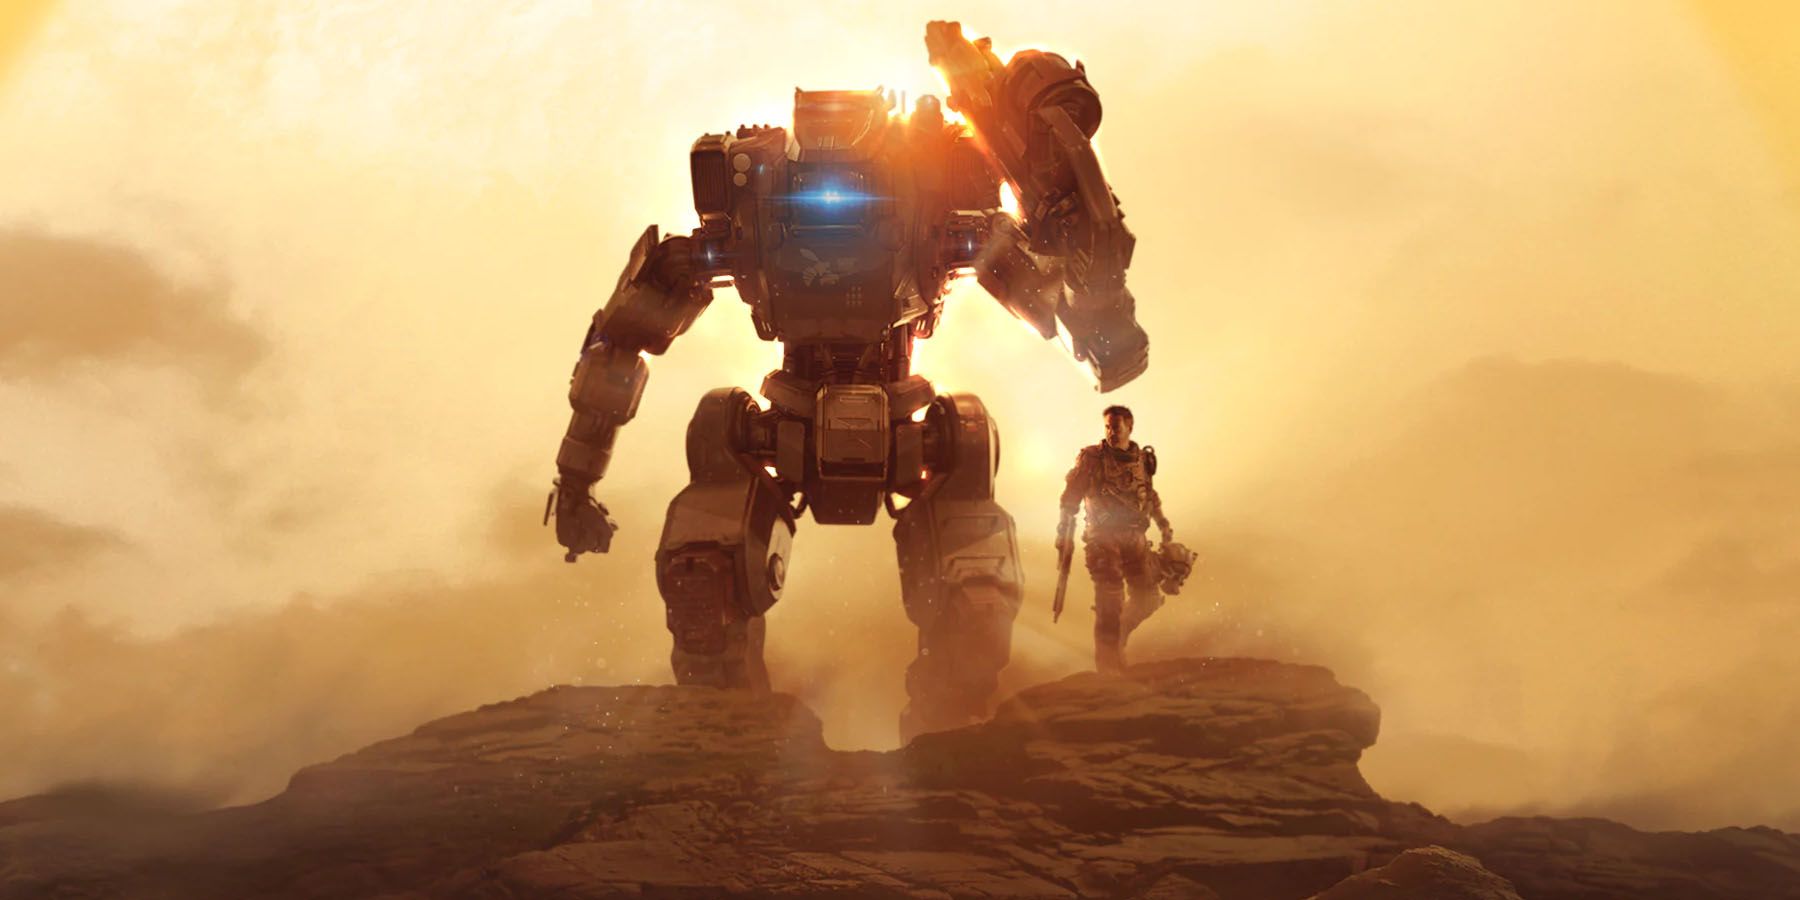 Some Titanfall Fans Think Respawn Just Teased a Third Game in the Series